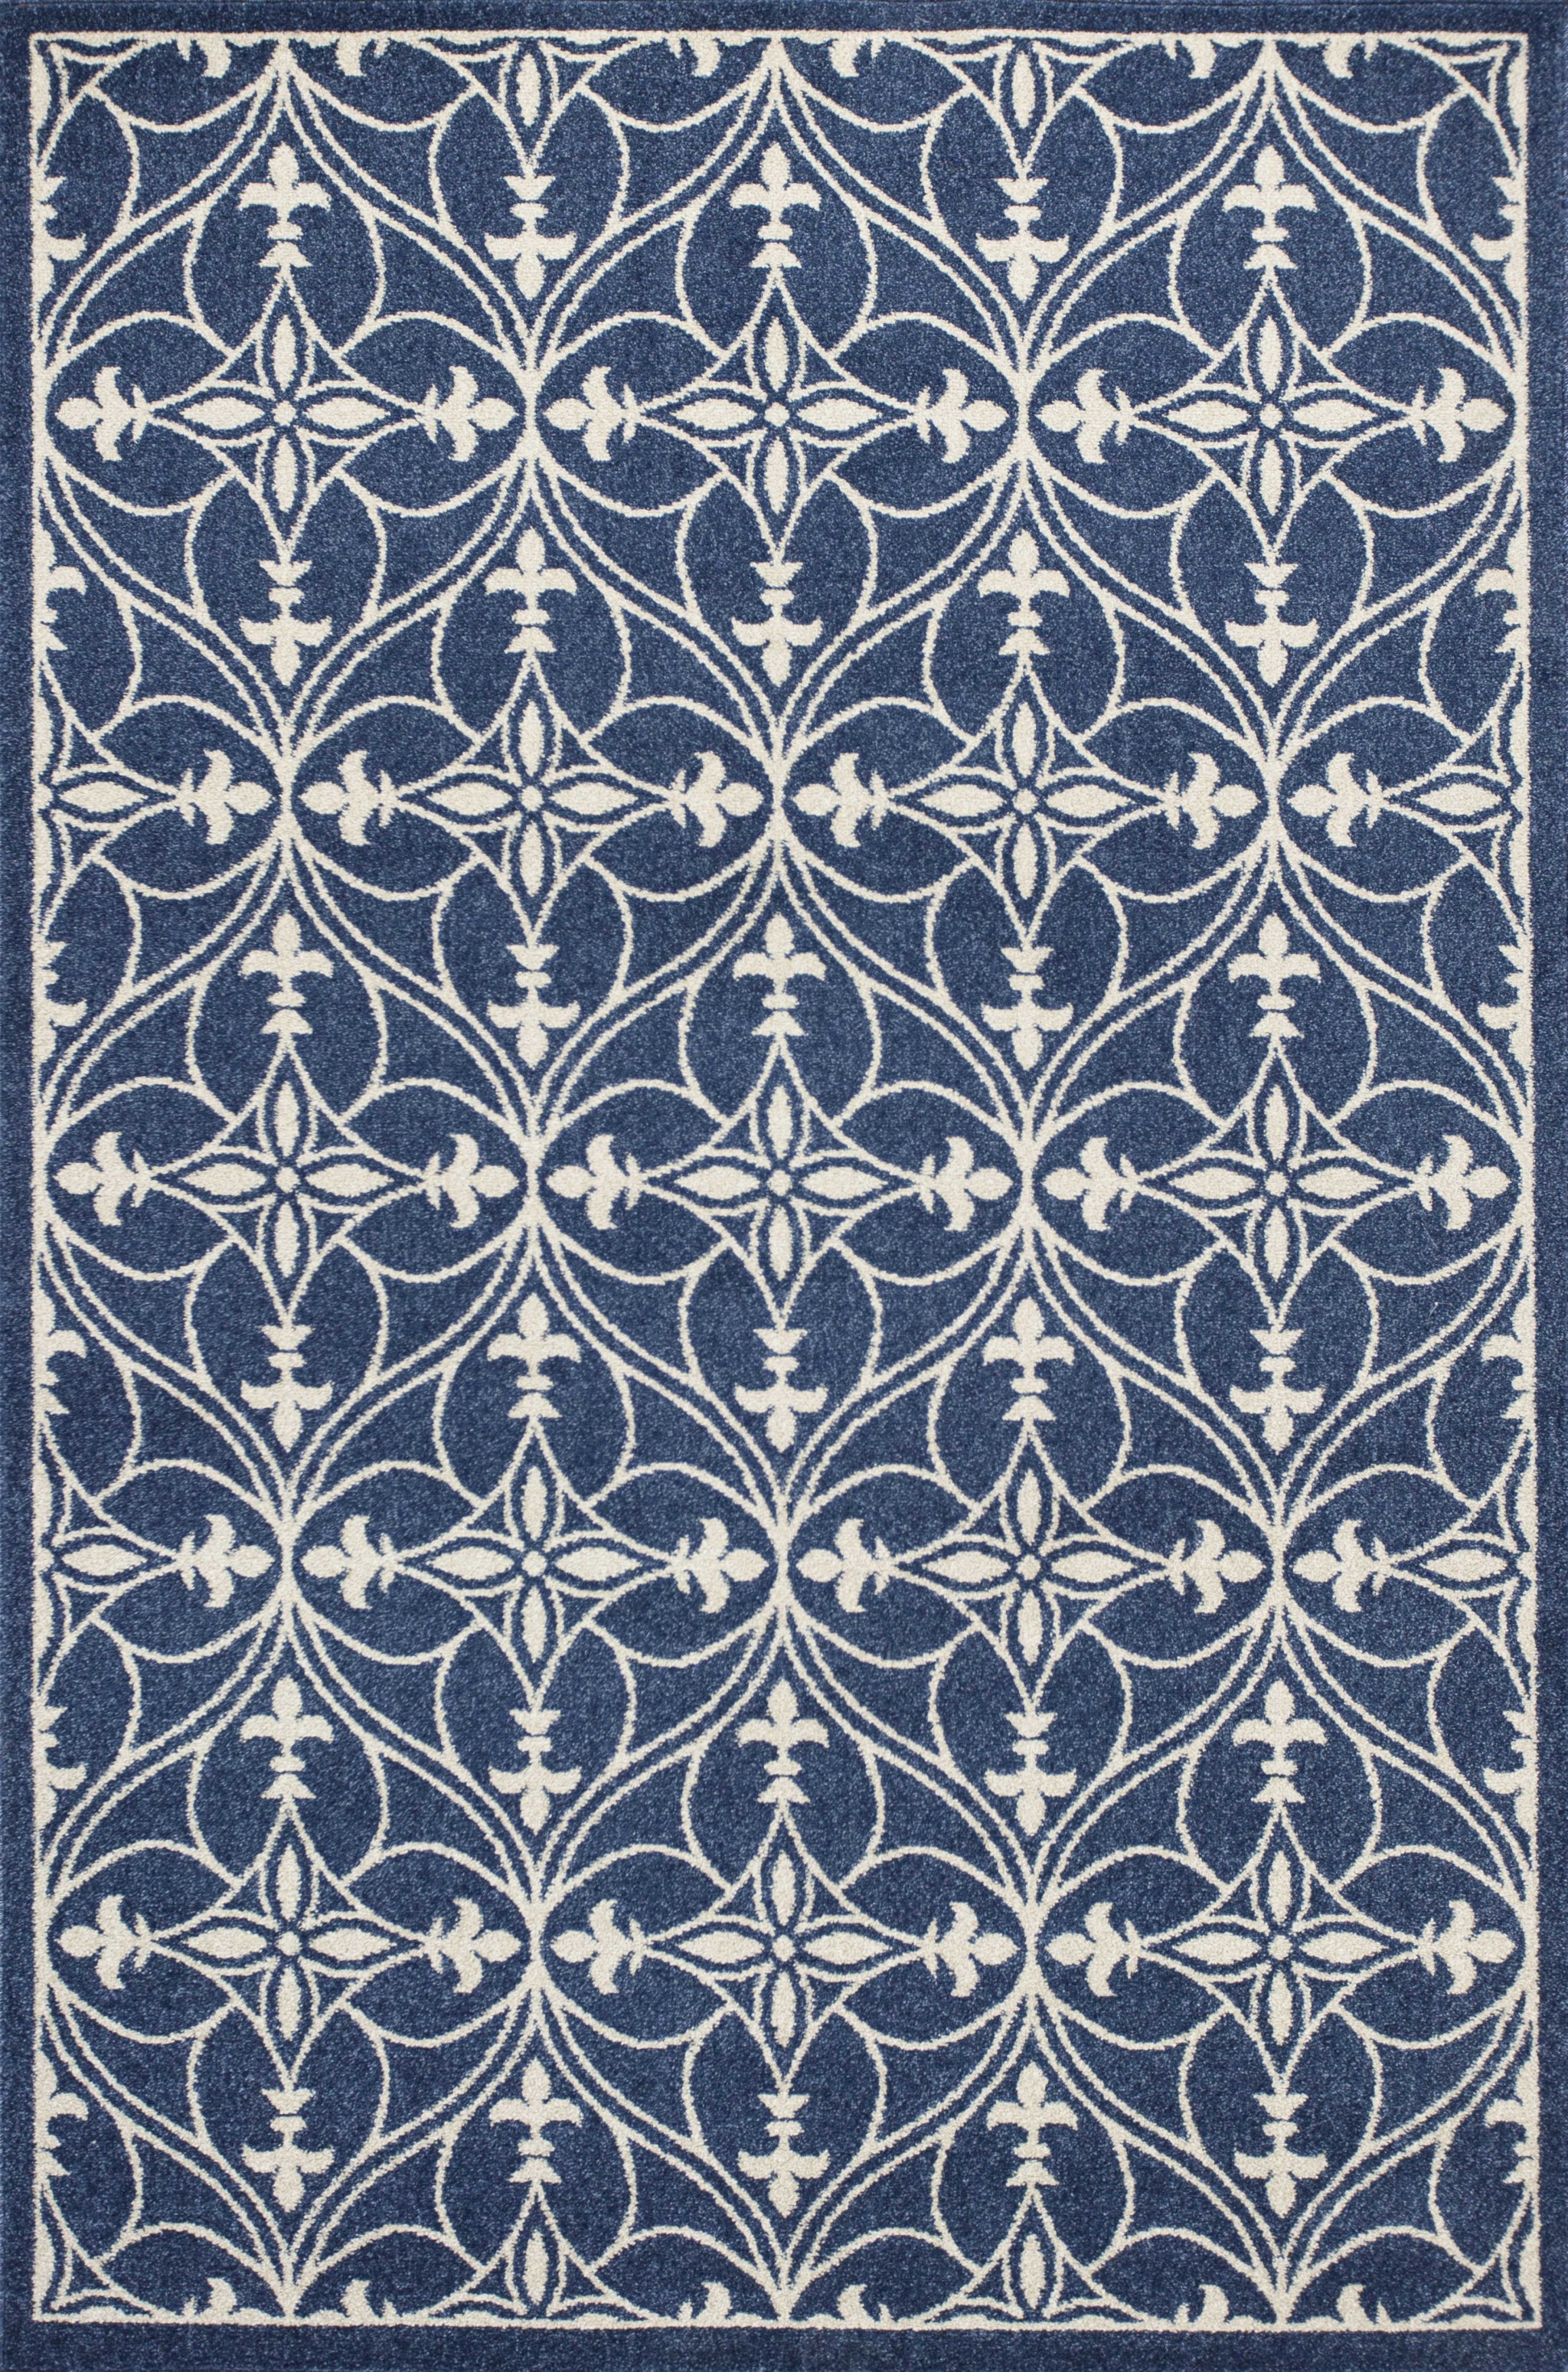 2' x 3' Blue and Ivory Area Rug-353149-1